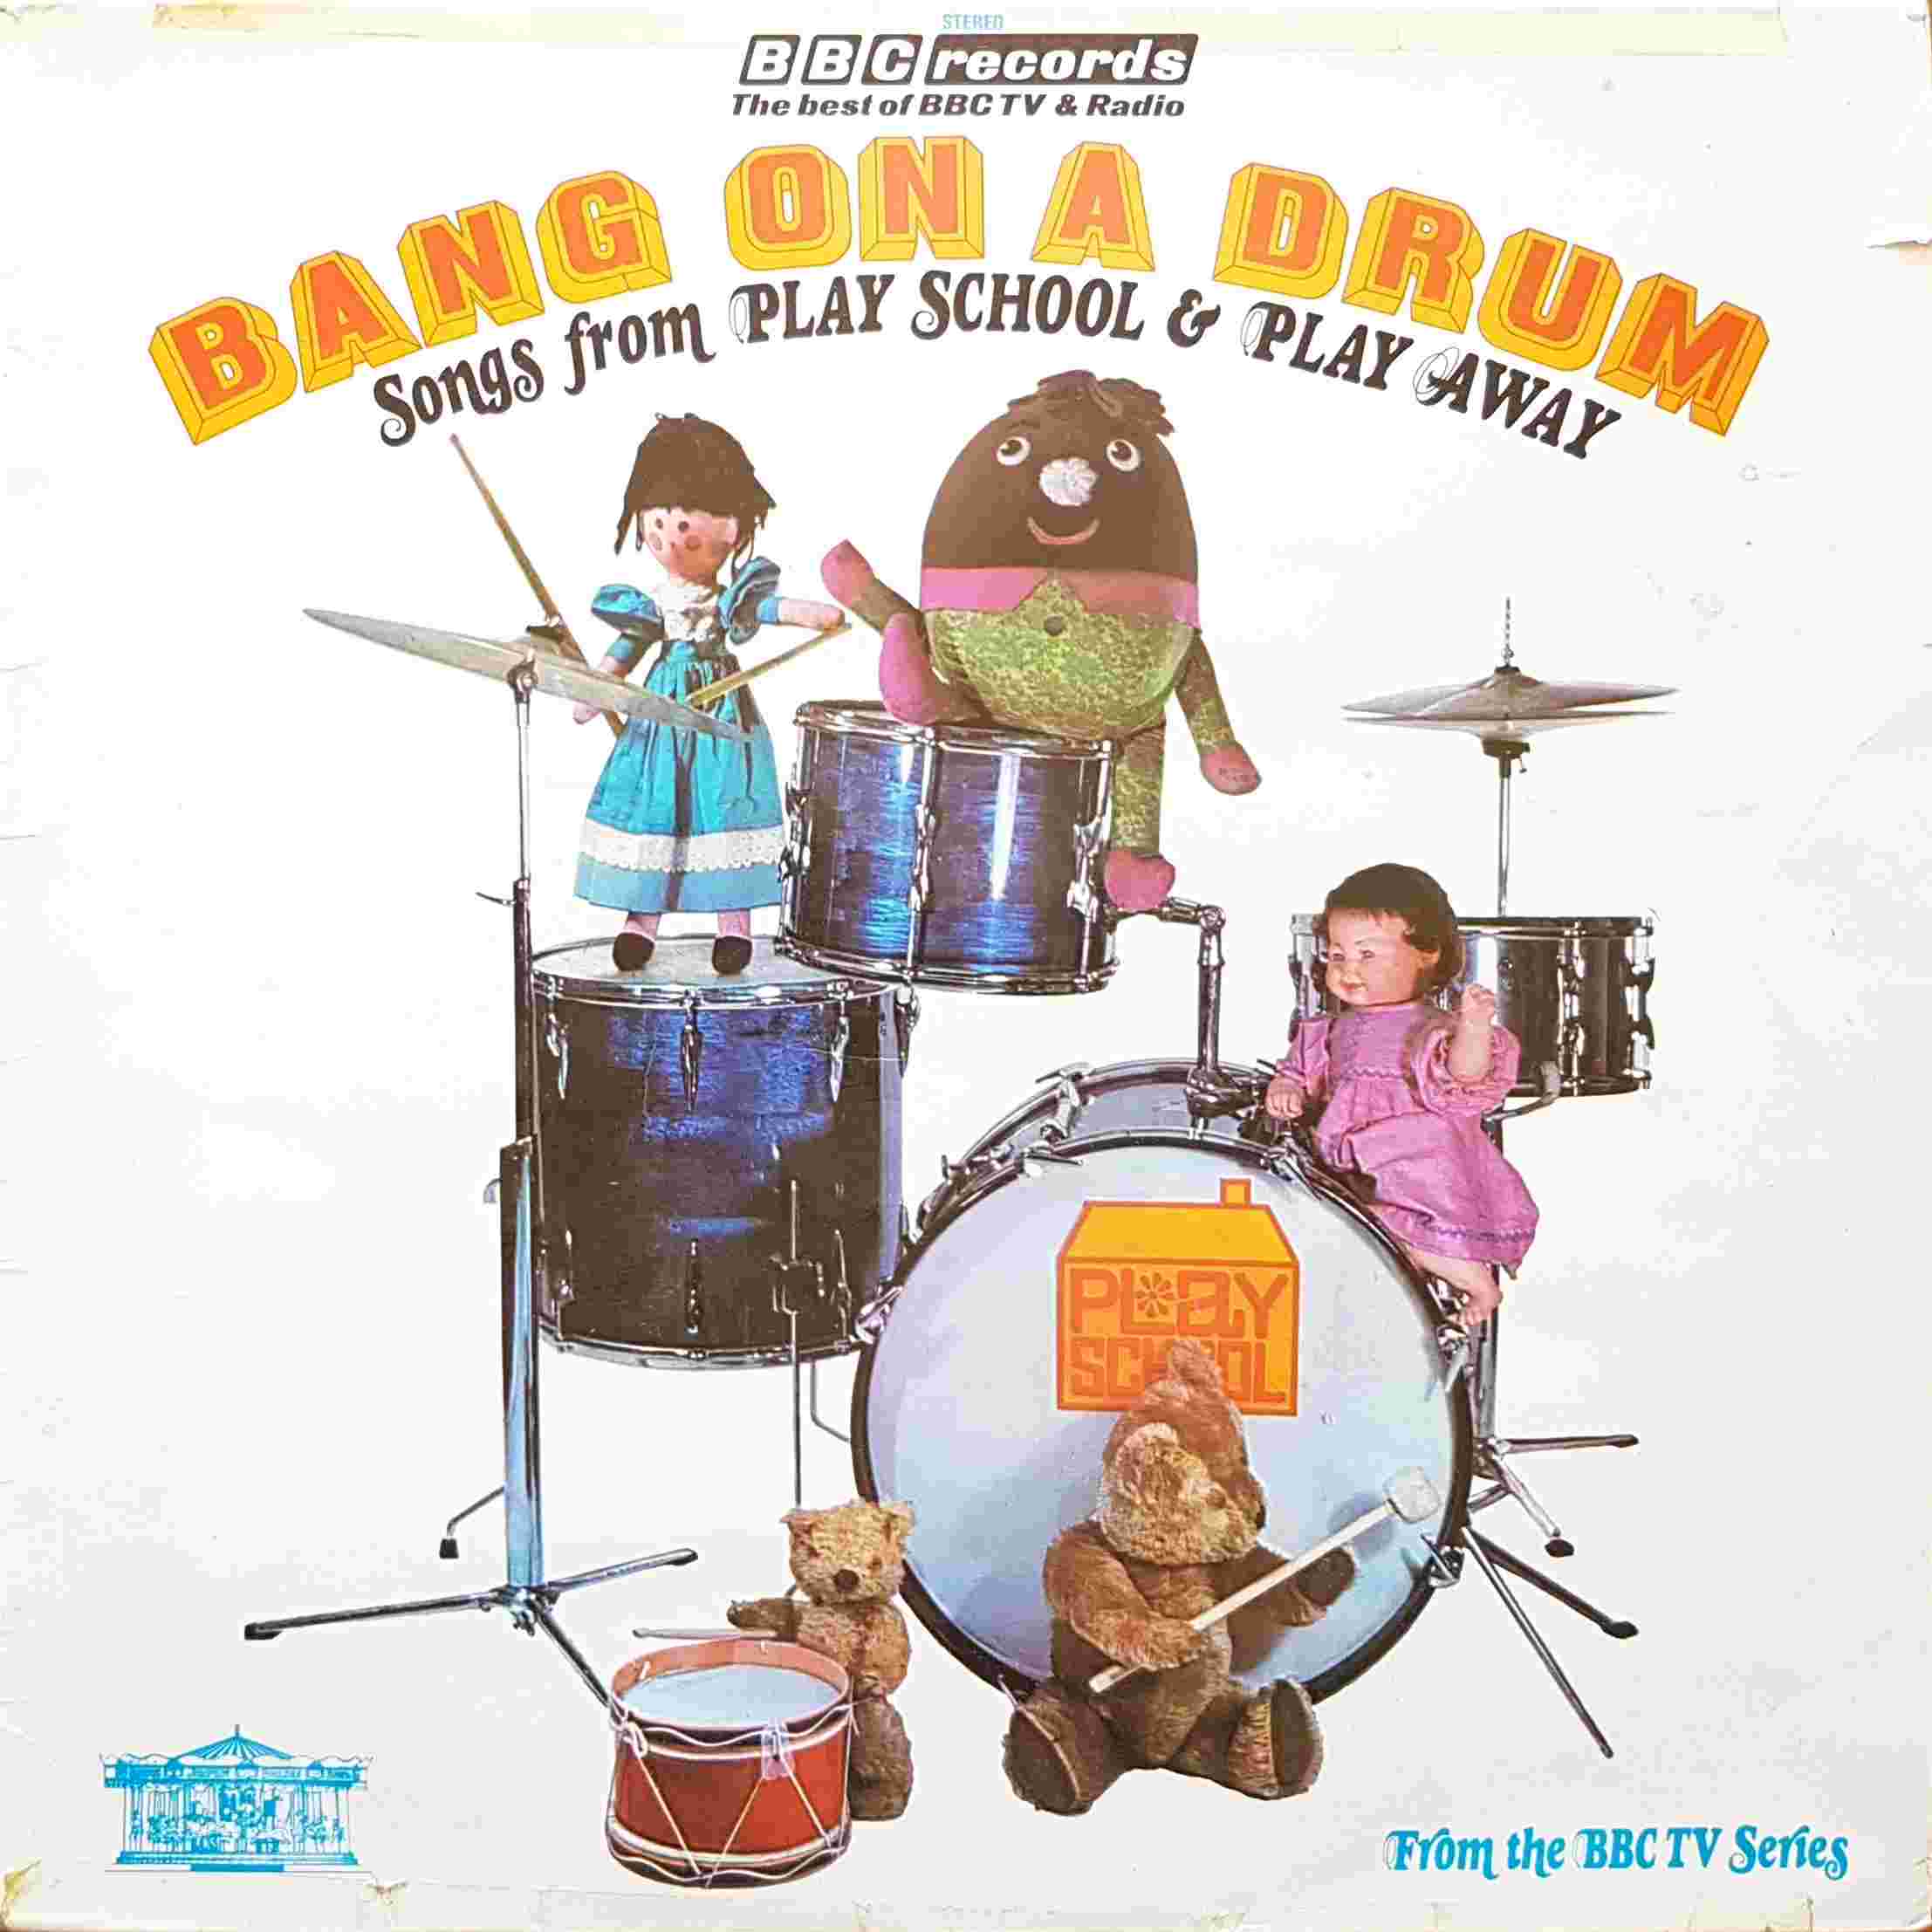 Picture of RBT 17 Bang on a drum - Songs from Play School and Play Away  by artist Various from the BBC albums - Records and Tapes library